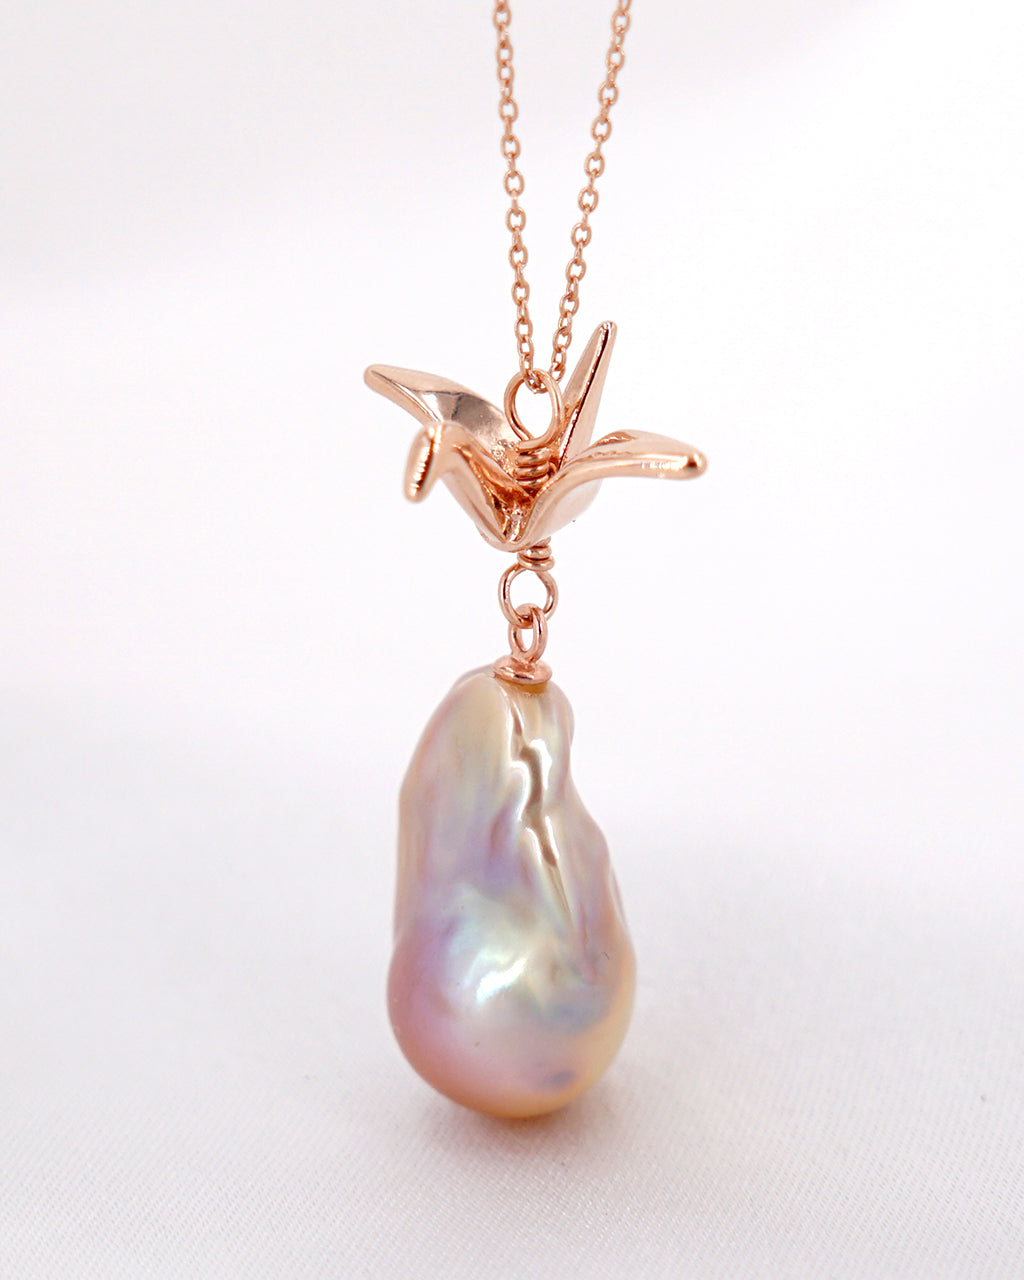 Rose Lavender Baroque Pearl Necklace - Hope - Wedding Bridal Jewelry for Brides and Bridesmaids | Singapore